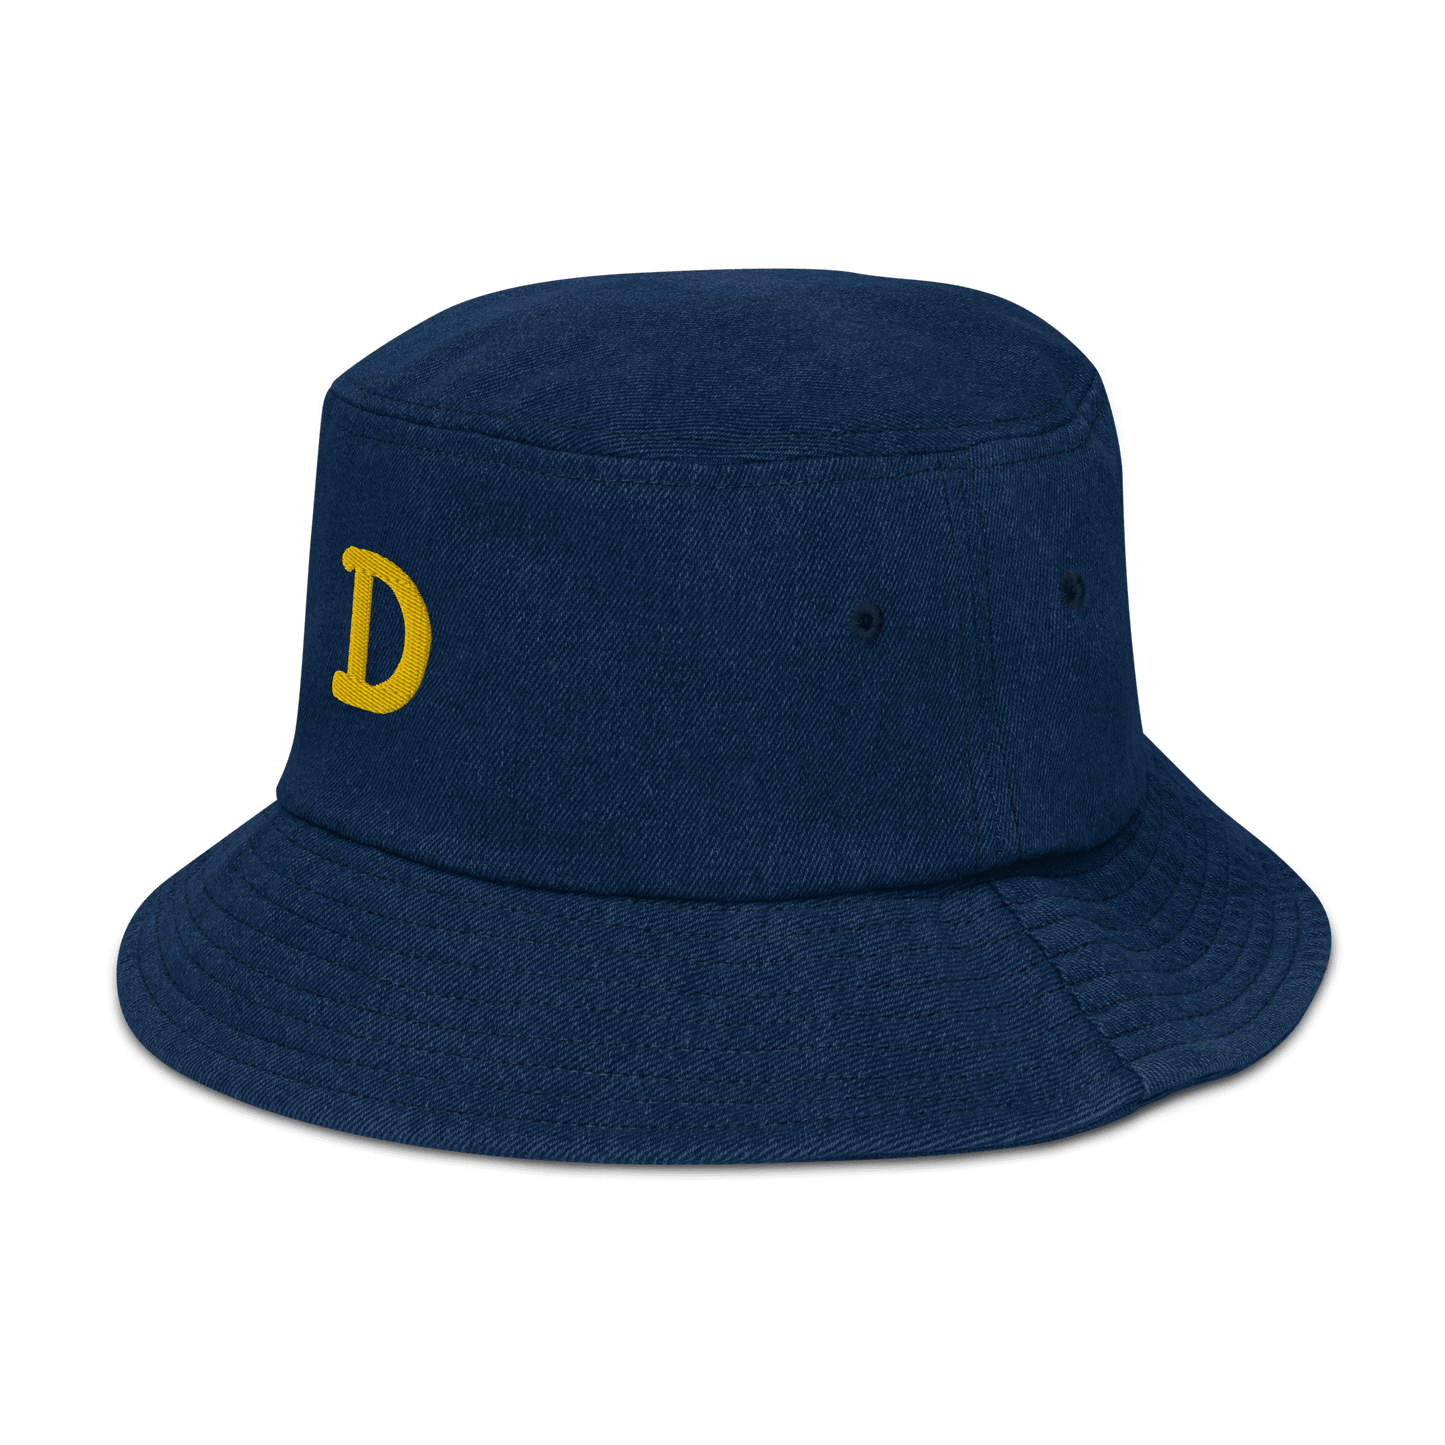 Detroit 'Old French D' Denim Bucket Hat | Yellow Embroidery - Circumspice Michigan